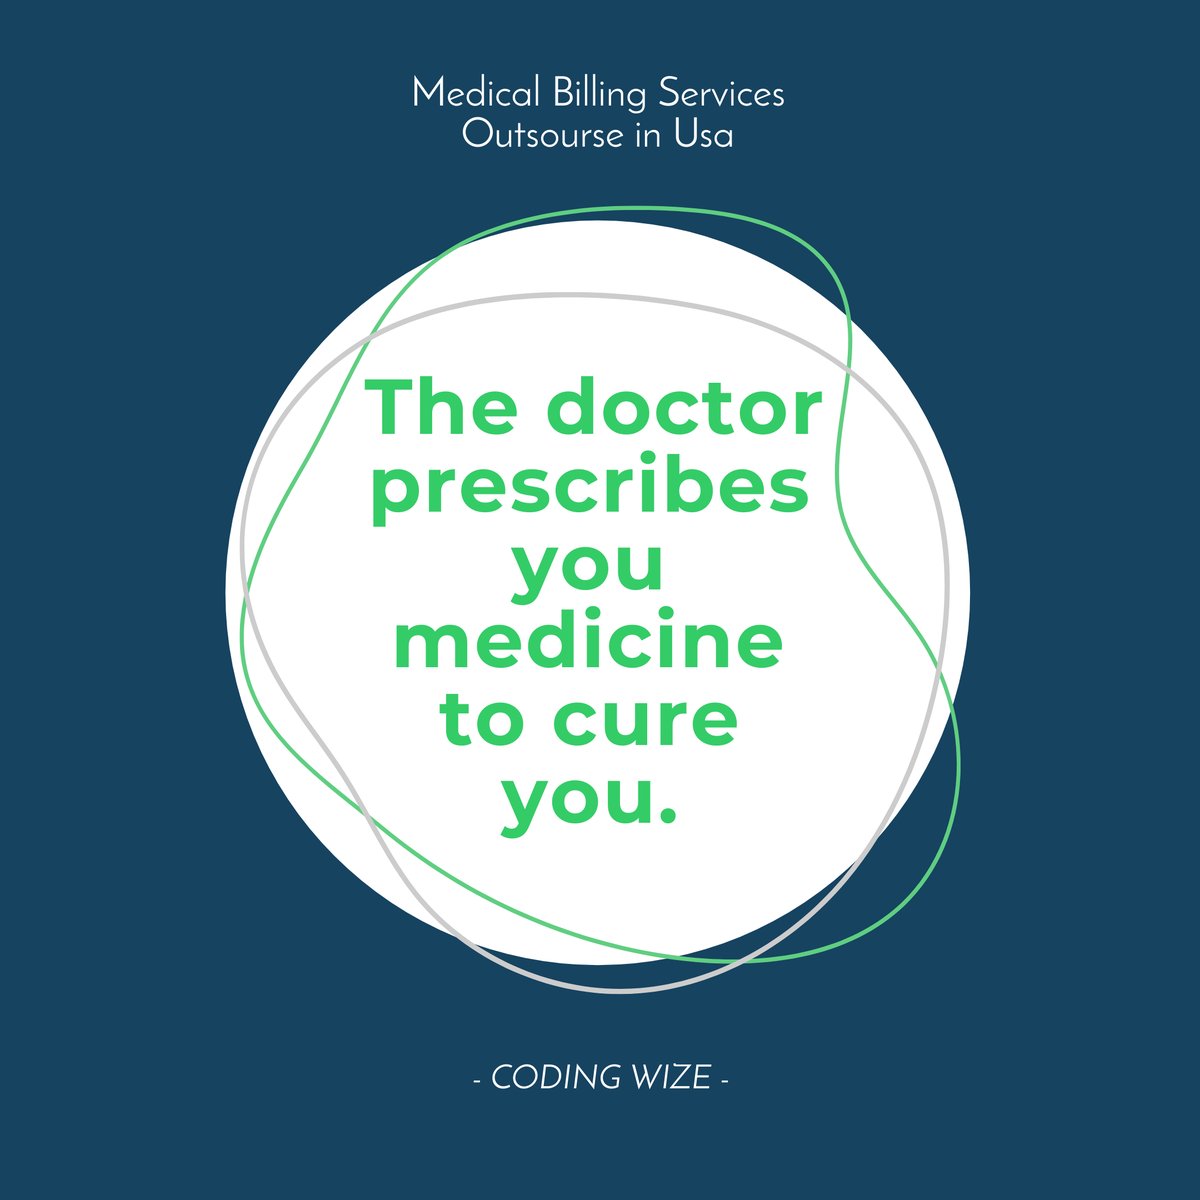 Best Medical Coding Company @CodingWizeUSA 

The Doctors prescribes you medicine to cure you.

Health Care Medical Support
info@codingwize.com
+1 (480) 696-7174

#medicalbillingcompany #billingexperts #medicalbillingexpert #medicalbillingservice #clinicalcoding #medicalbilling